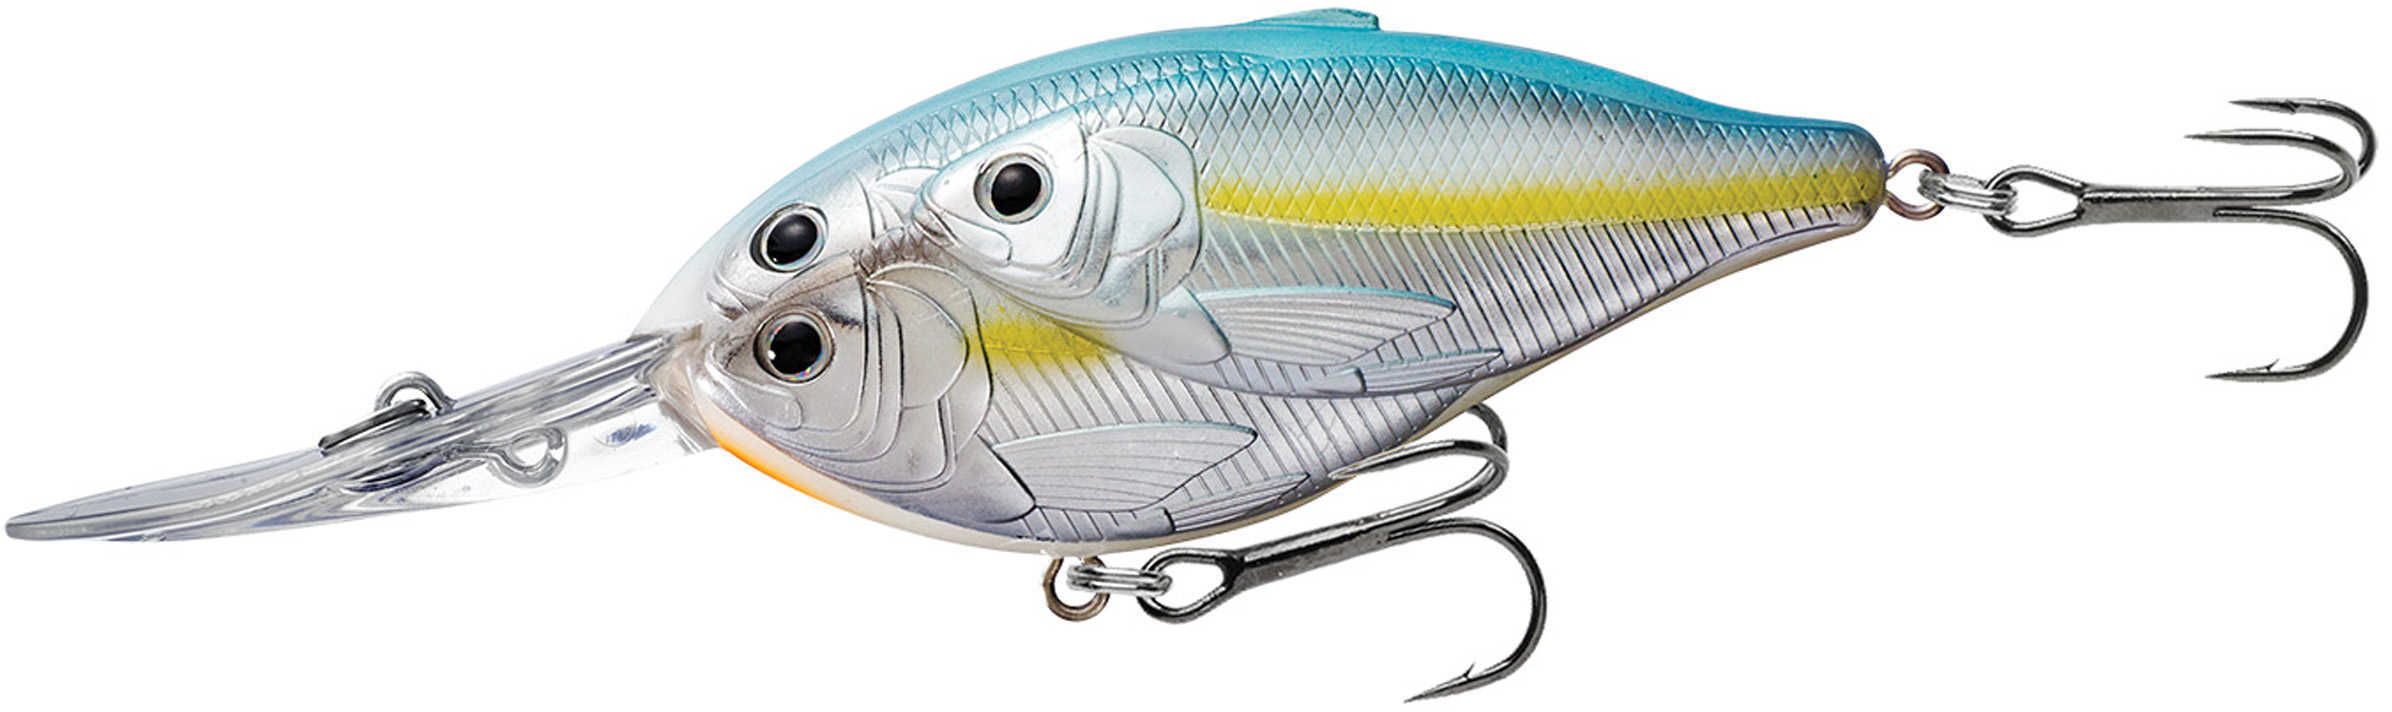 LIVETARGET Lures / Koppers Fishing and Tackle Corp Threadfin Shad Crankbait 3 1/2" Number Hook Size 20 Depth Metallic Pearl/Blue